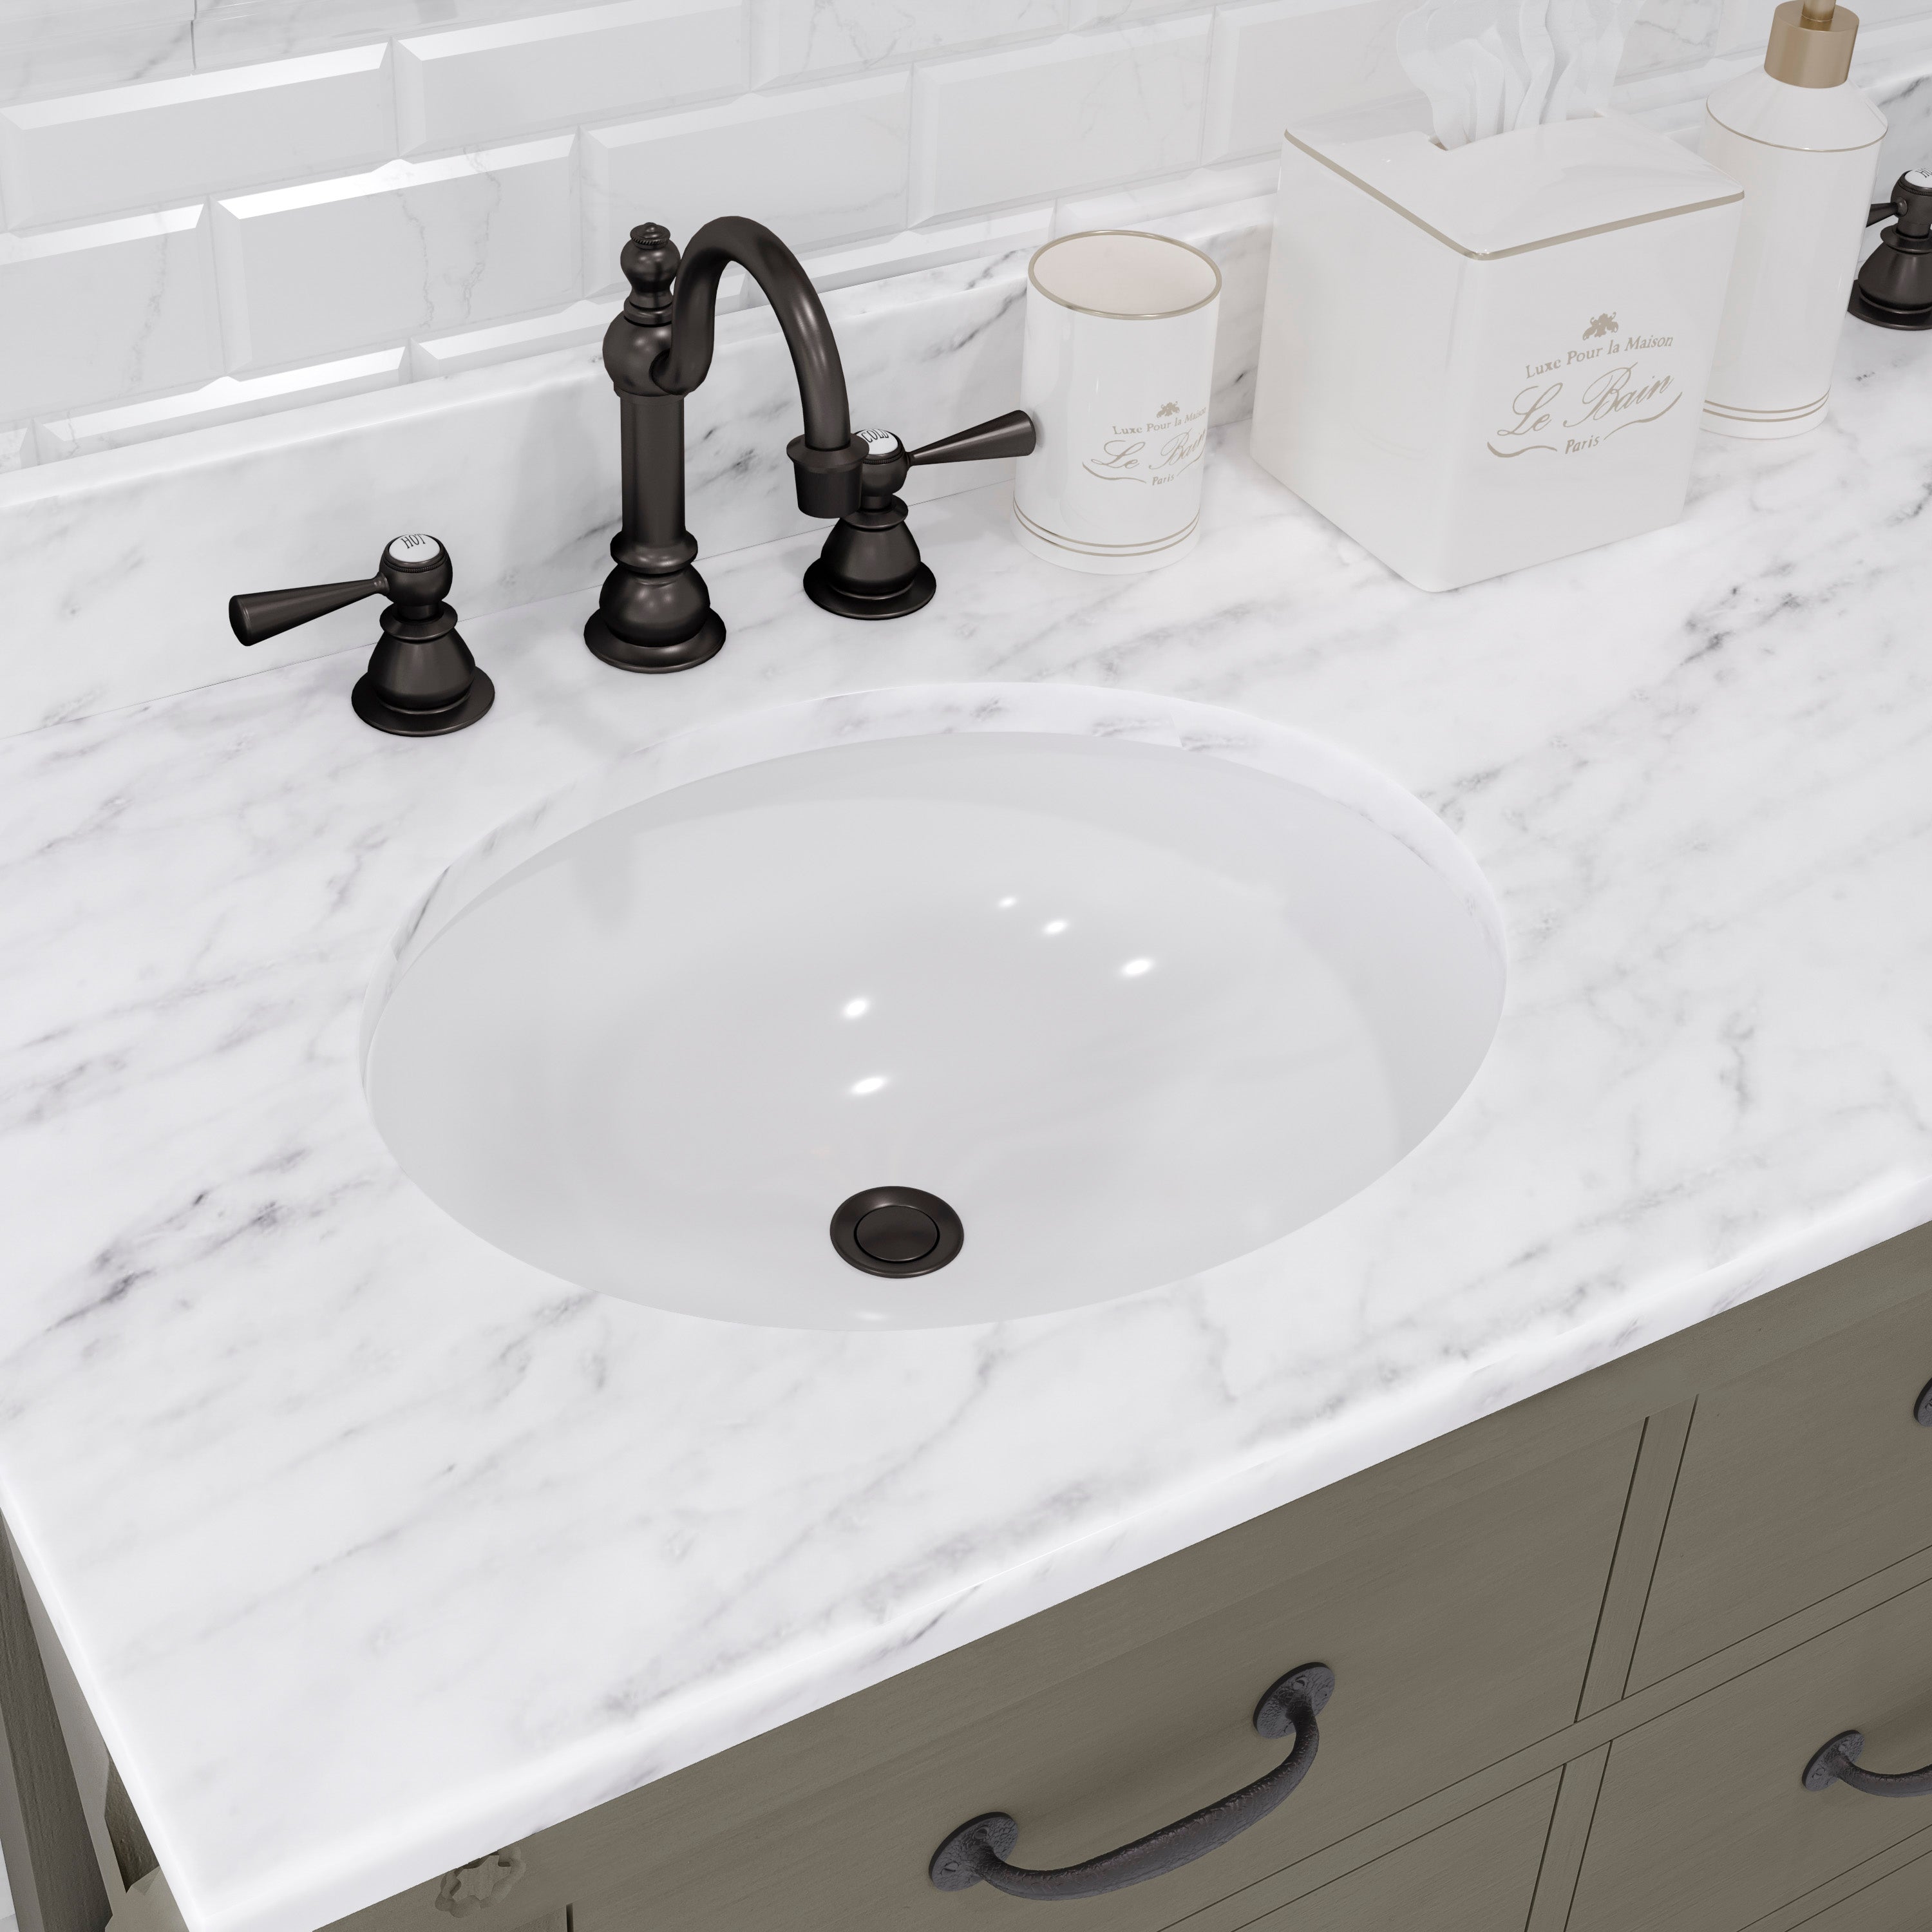 Water Creation | 60 Inch Grizzle Grey Double Sink Bathroom Vanity With Faucets With Carrara White Marble Counter Top From The ABERDEEN Collection | AB60CW03GG-000BX1203